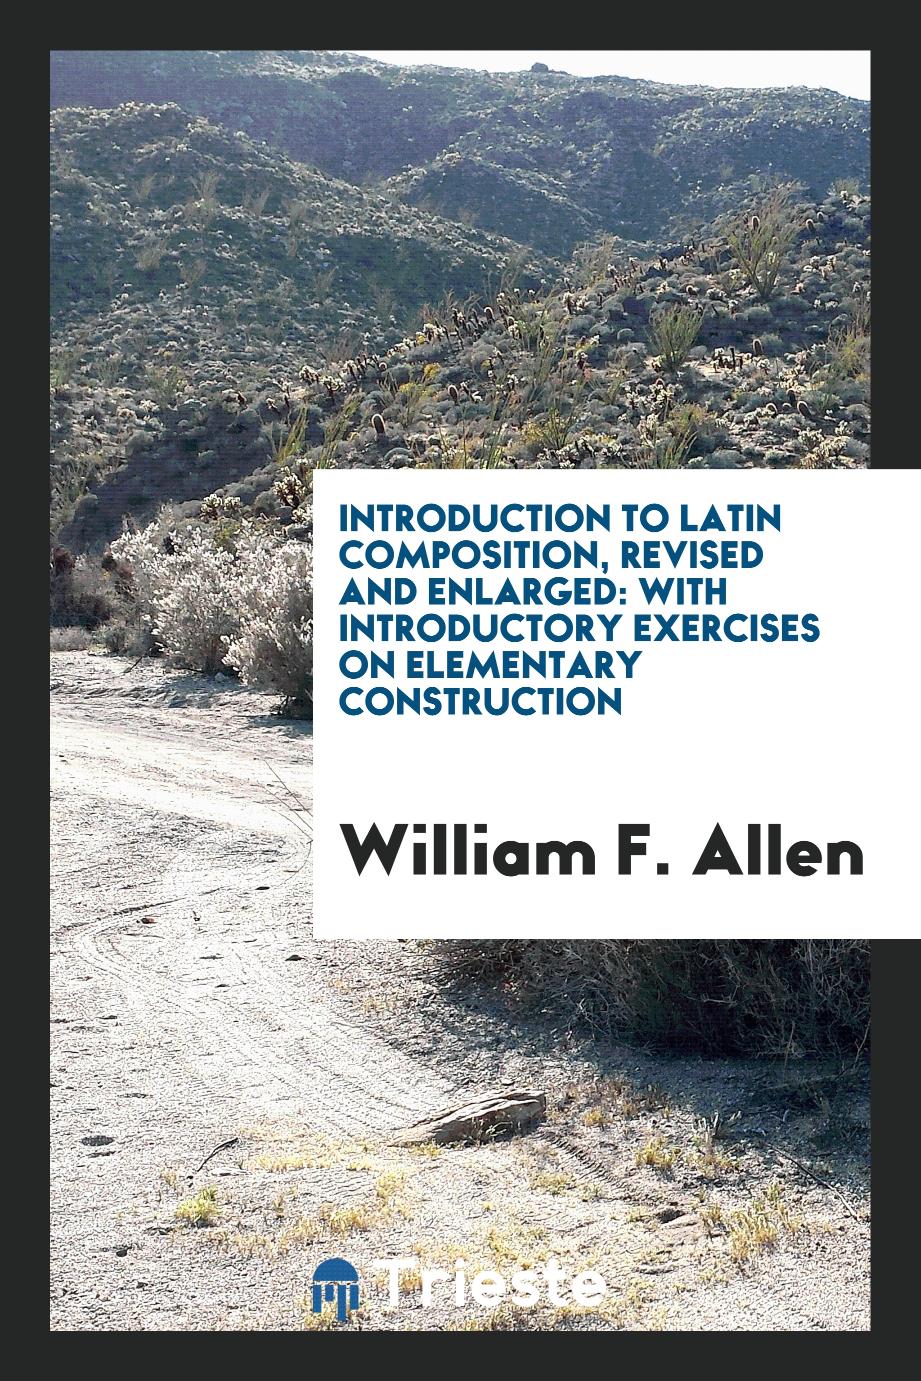 Introduction to Latin Composition, Revised and Enlarged: With Introductory Exercises on Elementary Construction